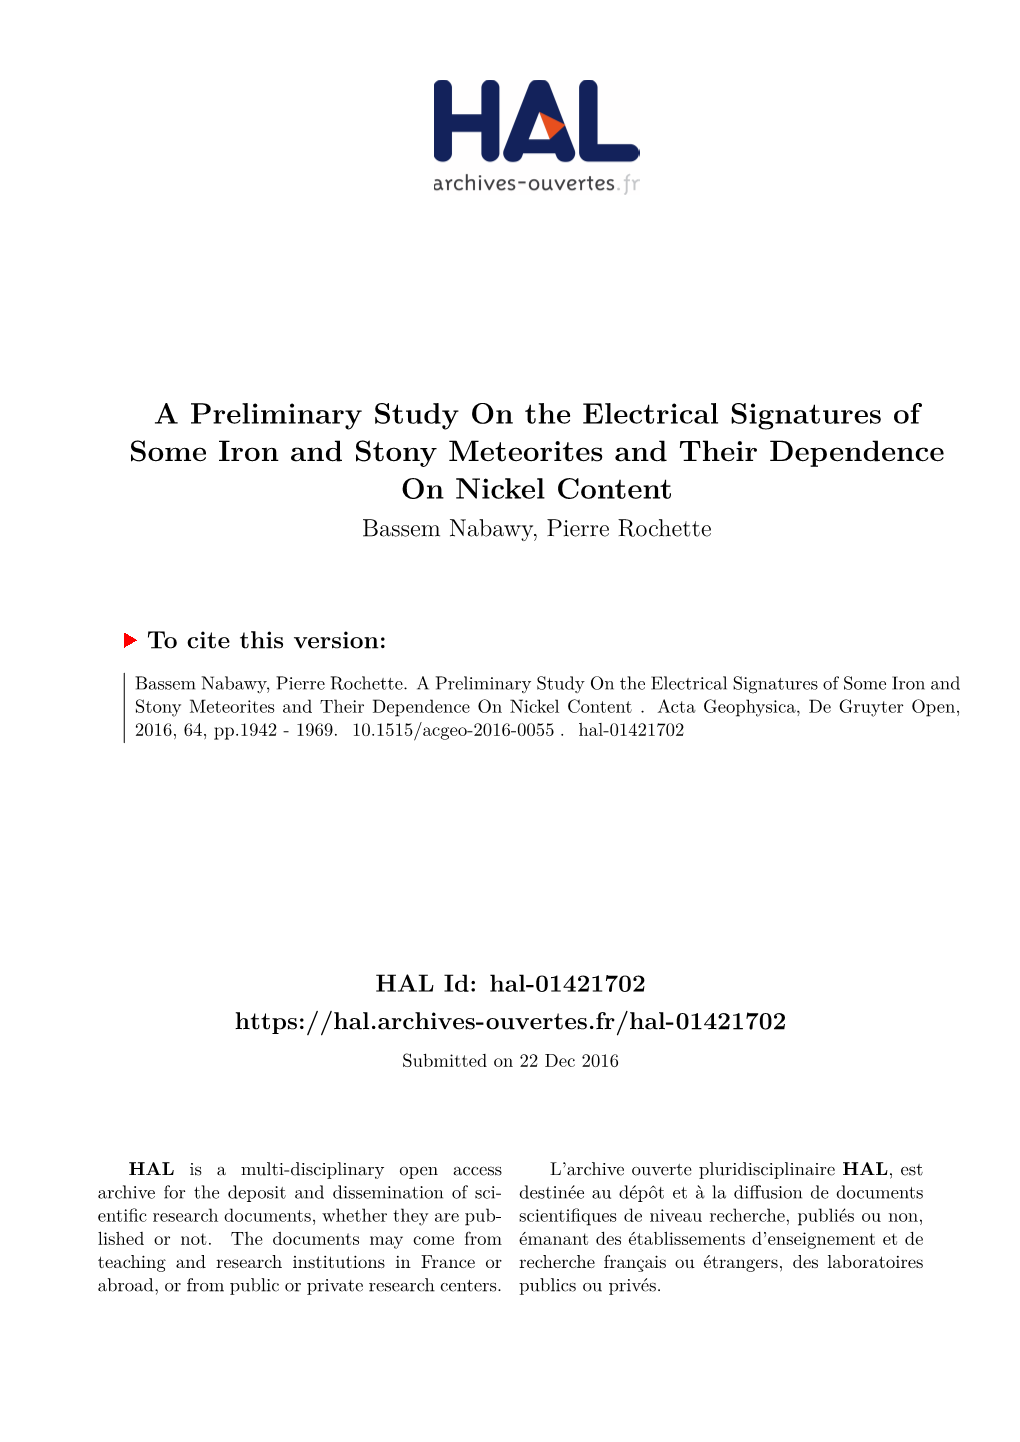 A Preliminary Study on the Electrical Signatures of Some Iron and Stony Meteorites and Their Dependence on Nickel Content Bassem Nabawy, Pierre Rochette